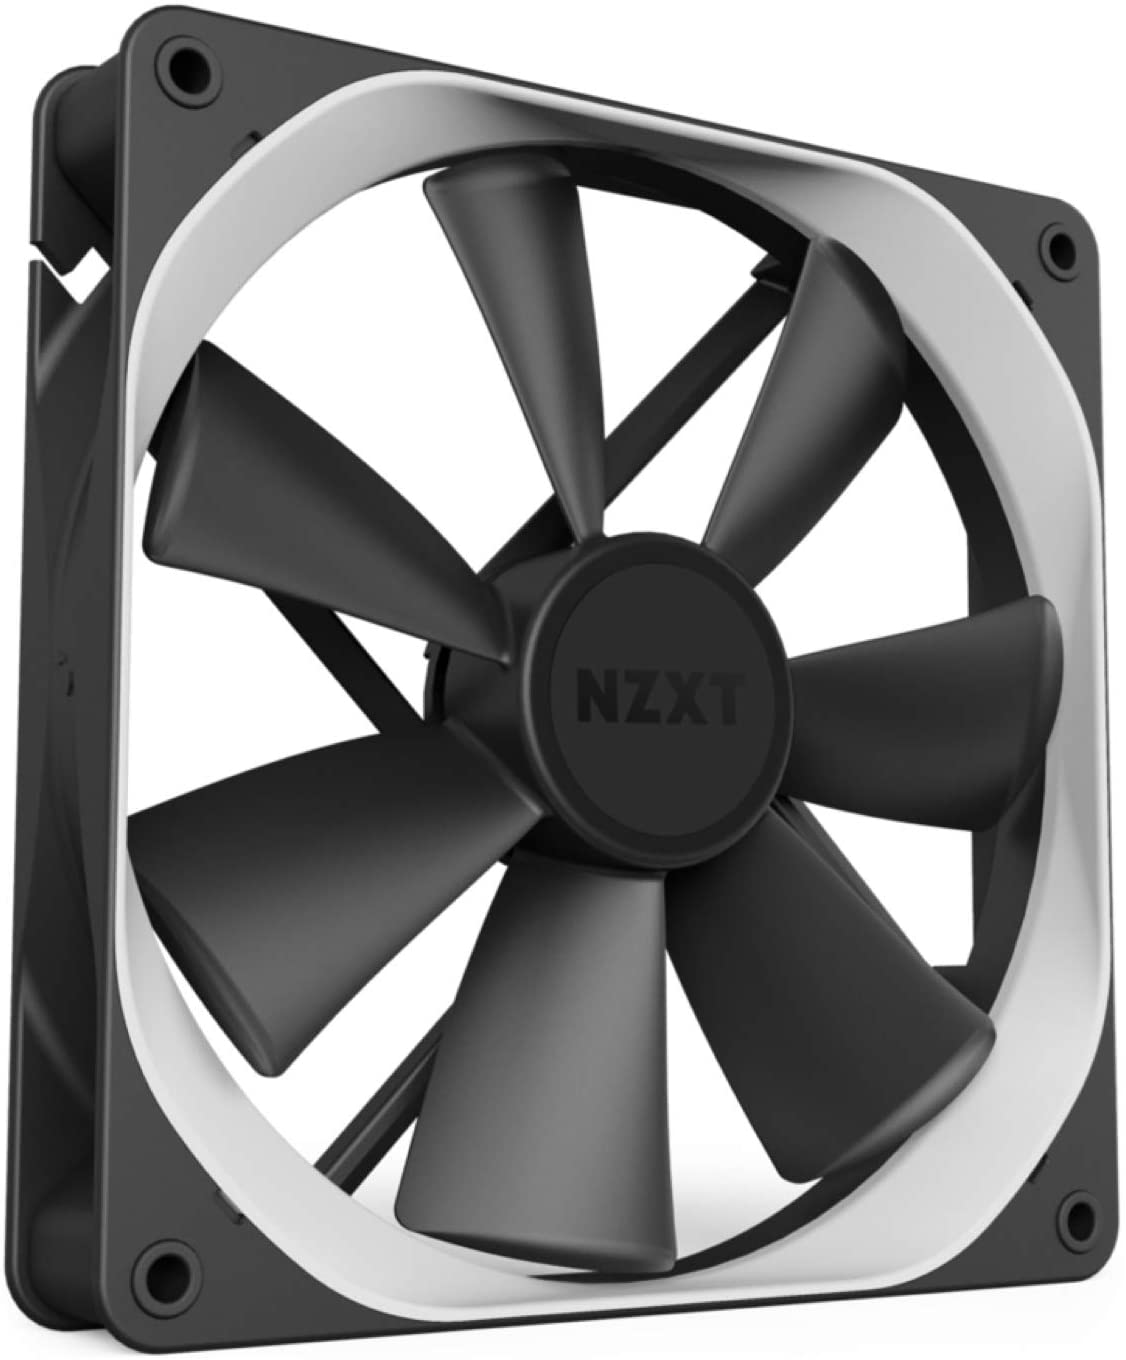 NZXT AER P RF-AP140-FP 140mm Gaming Computer Fan $7 + free shipping w Prime or on orders over $25